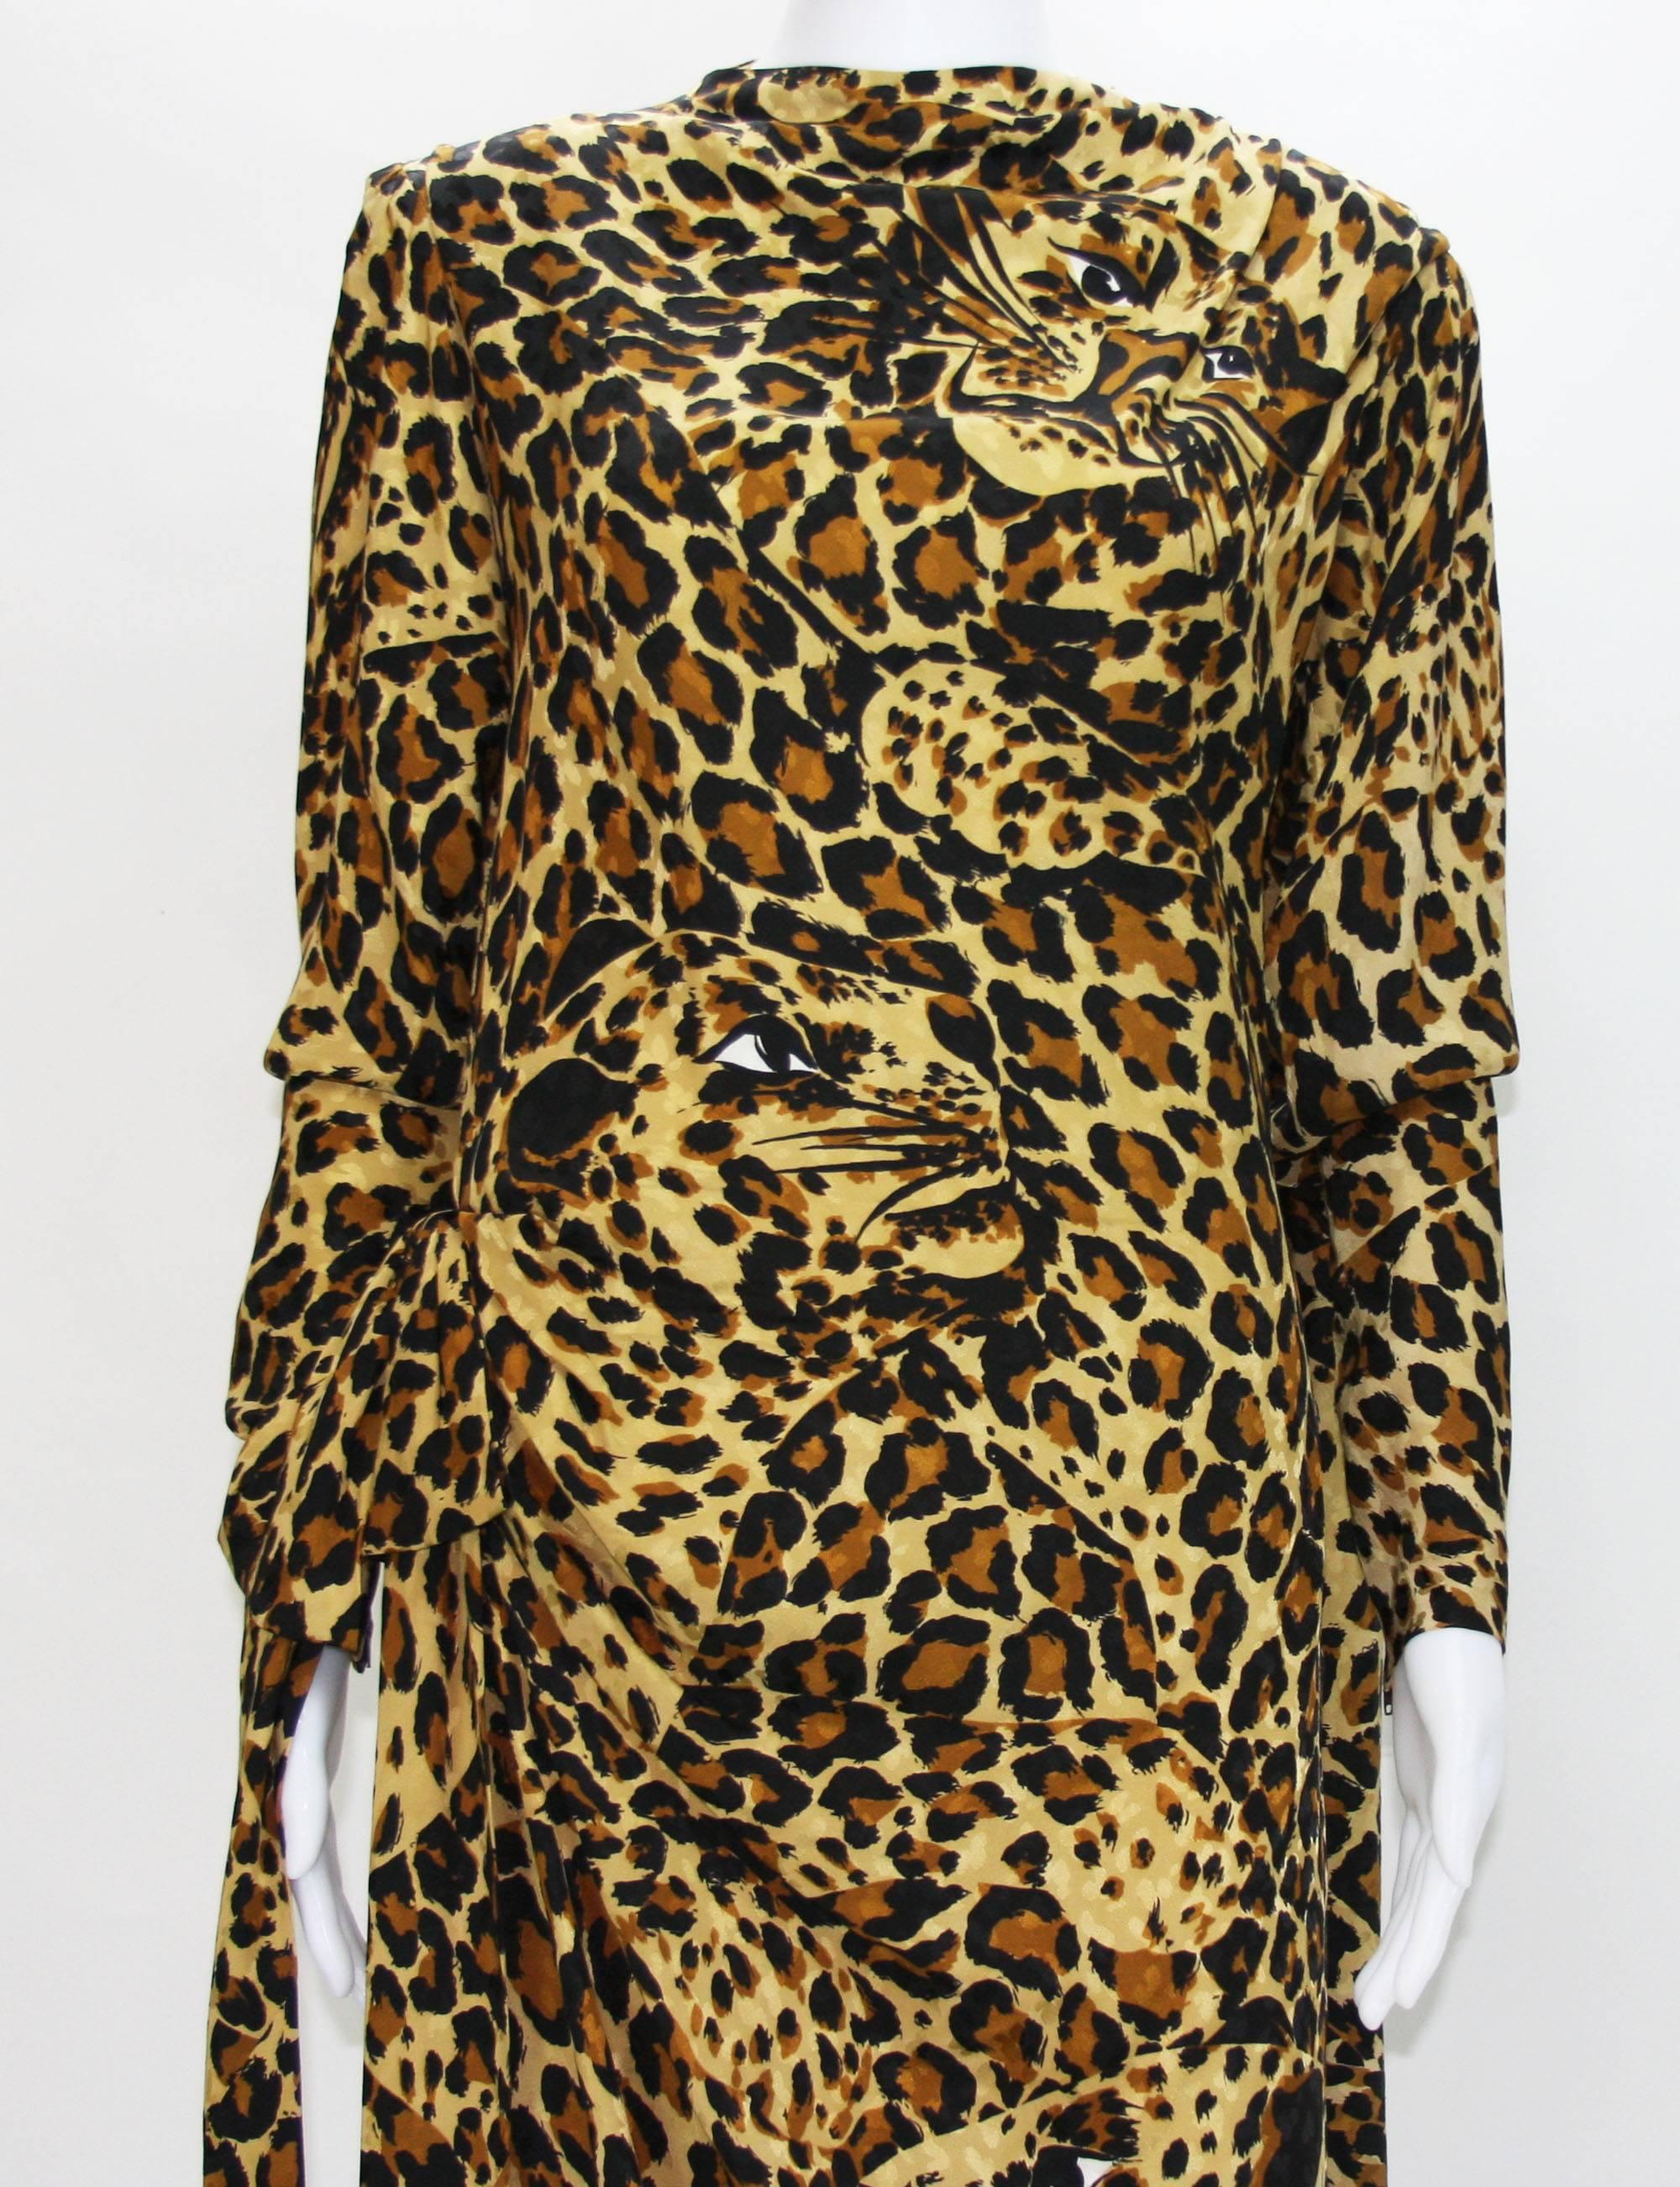 Yves Saint Laurent Runway F/W 1982/83 Leopard Silk Gown with High Slit Scarf Fr. For Sale 2